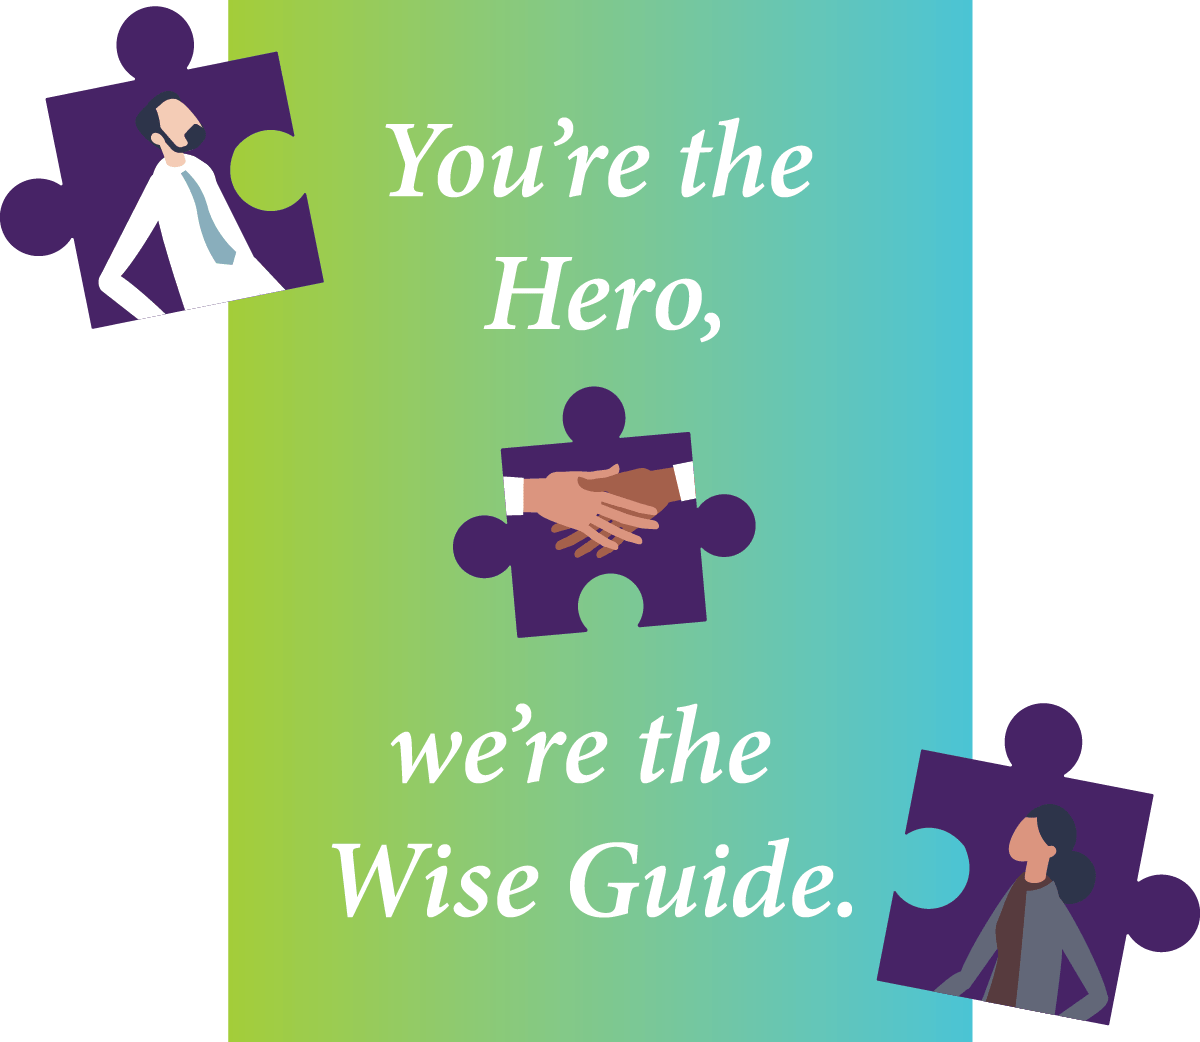 Puzzle pieces illustrating two people handshaking, showing text "You're the Hero, we're the Wise Guide."